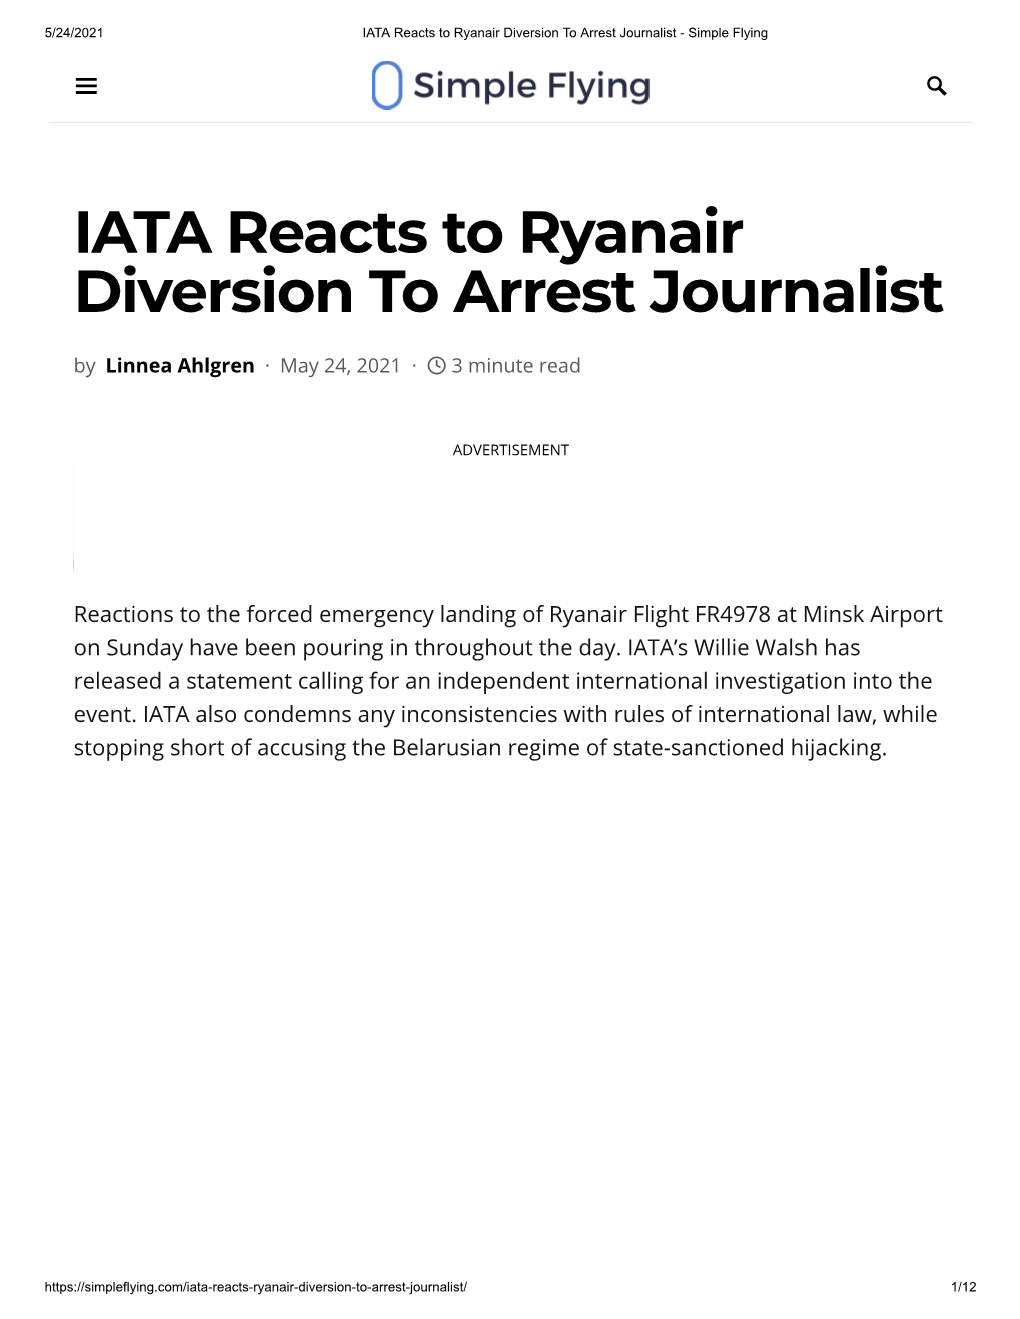 IATA Reacts to Ryanair Diversion to Arrest Journalist - Simple Flying